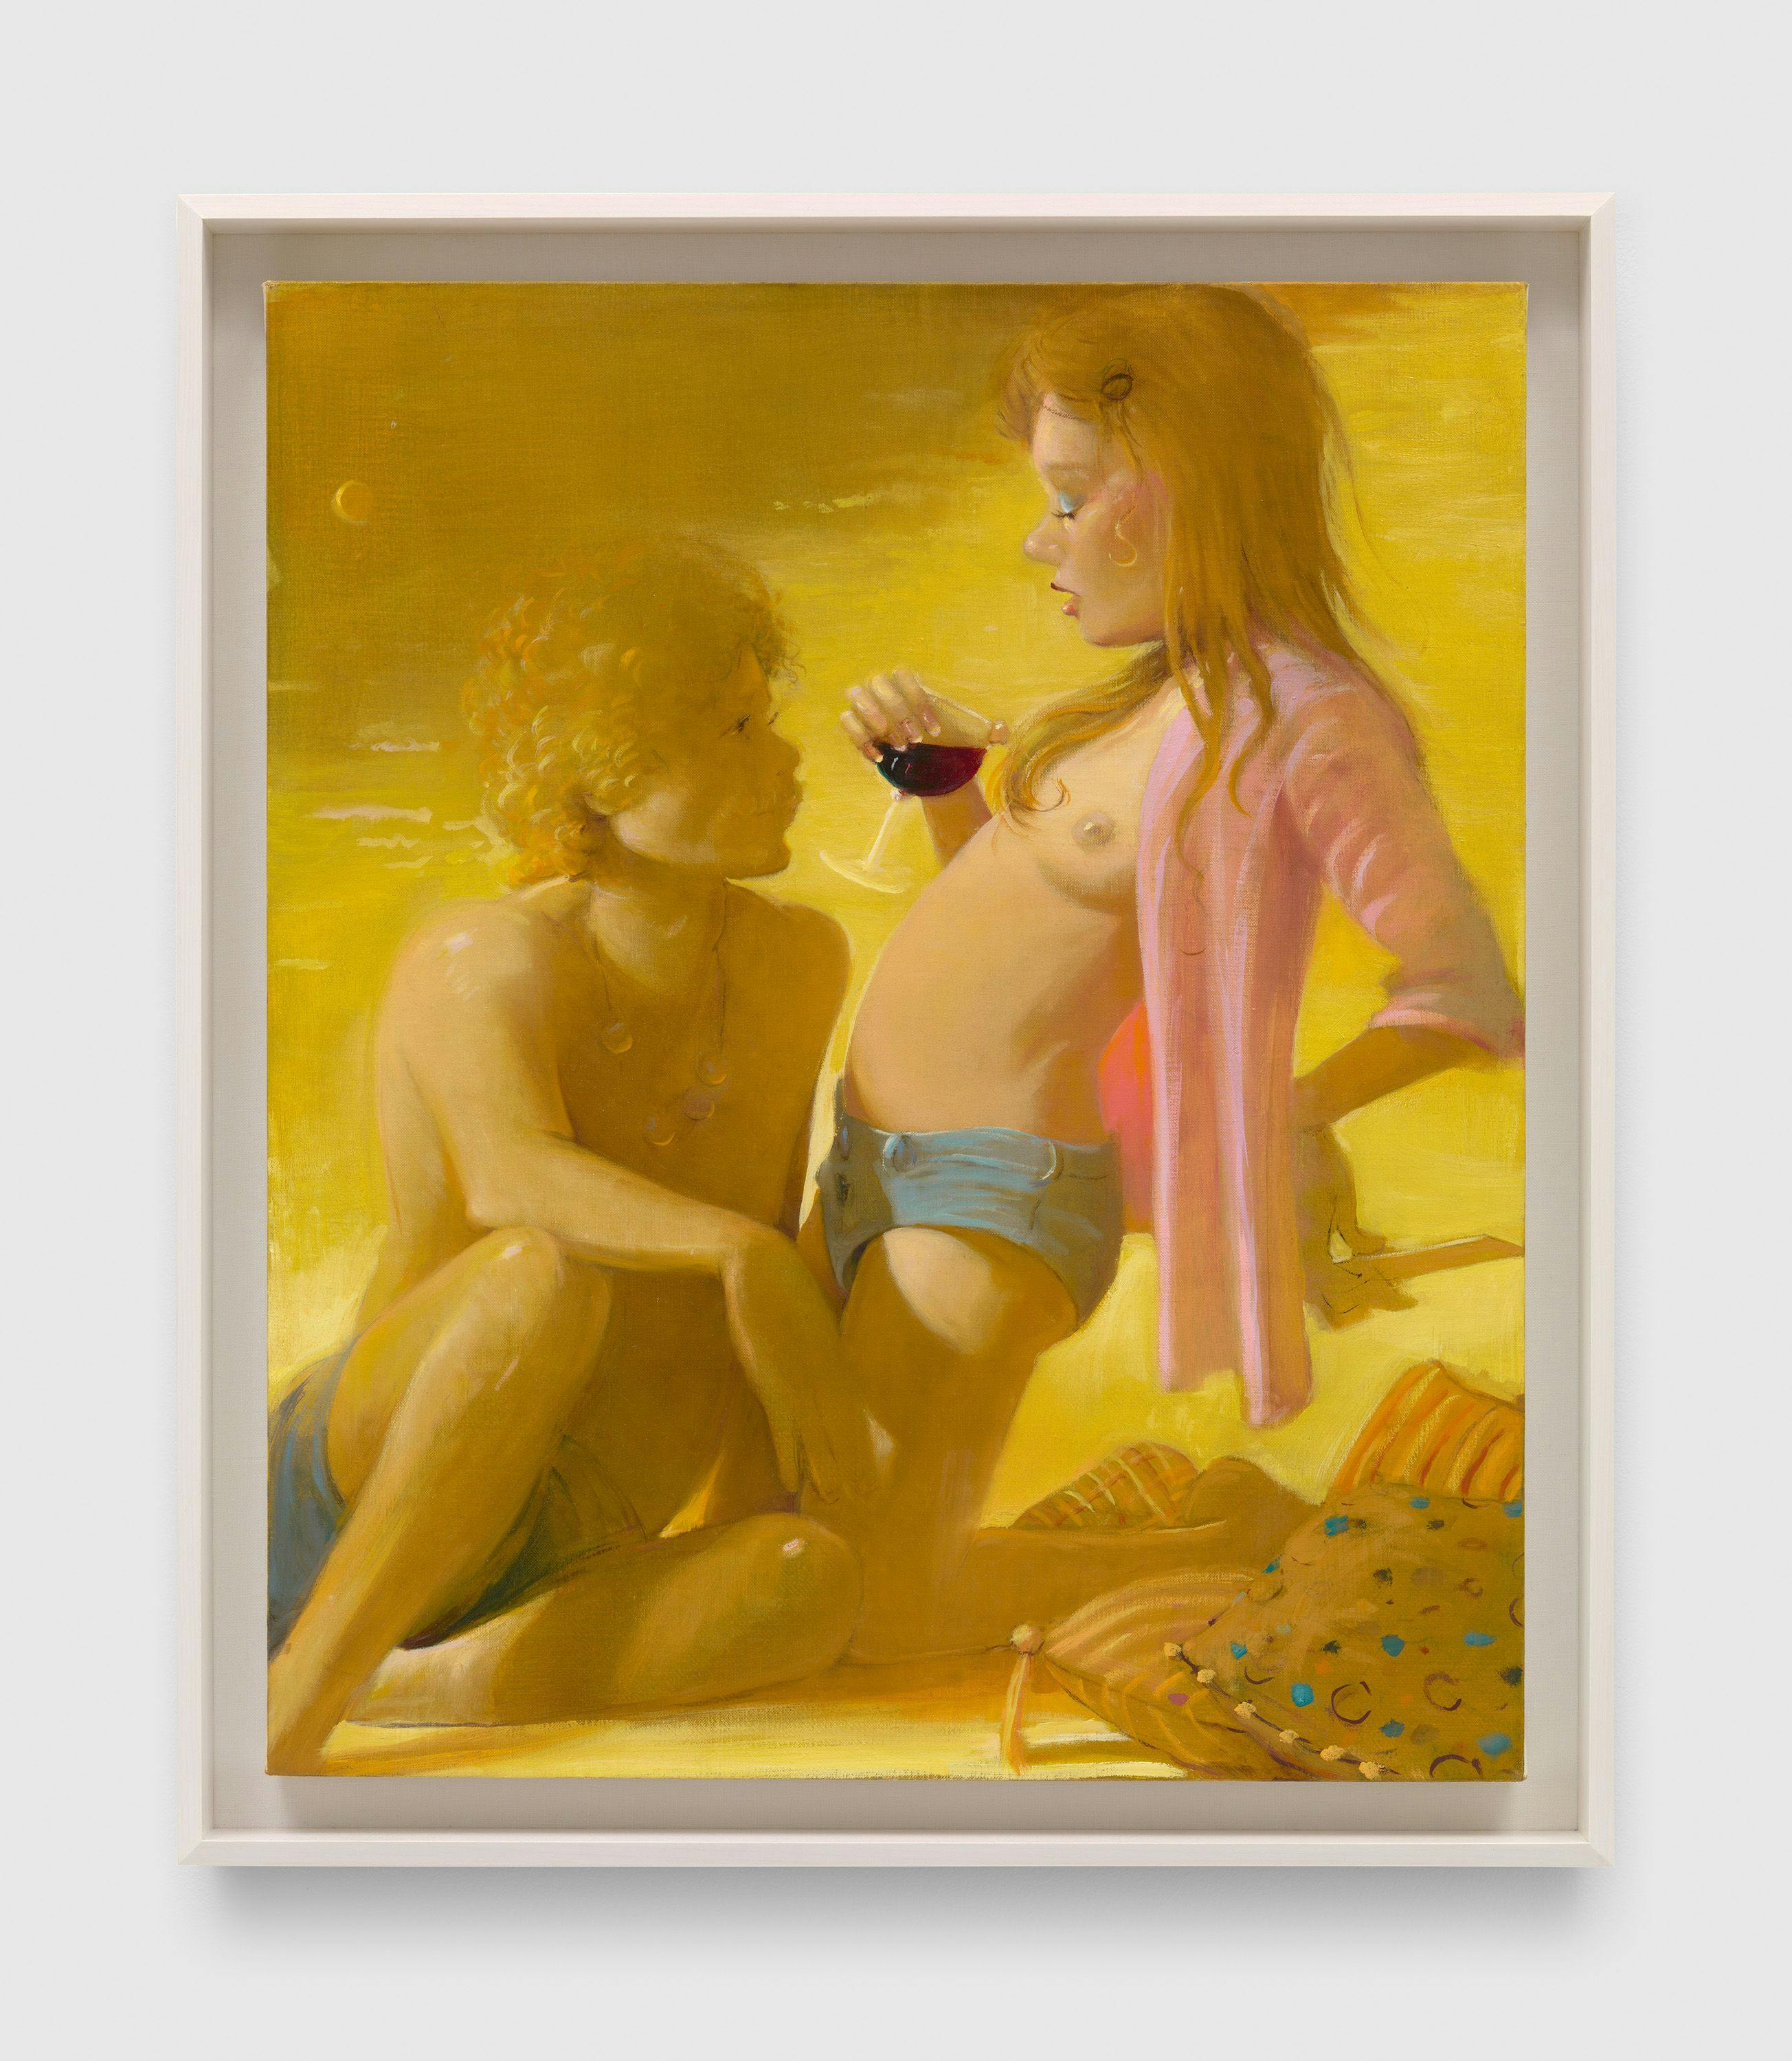 A painting by Lisa Yuskavage, titled Mrs. and Mr. Golden, dated 2018.